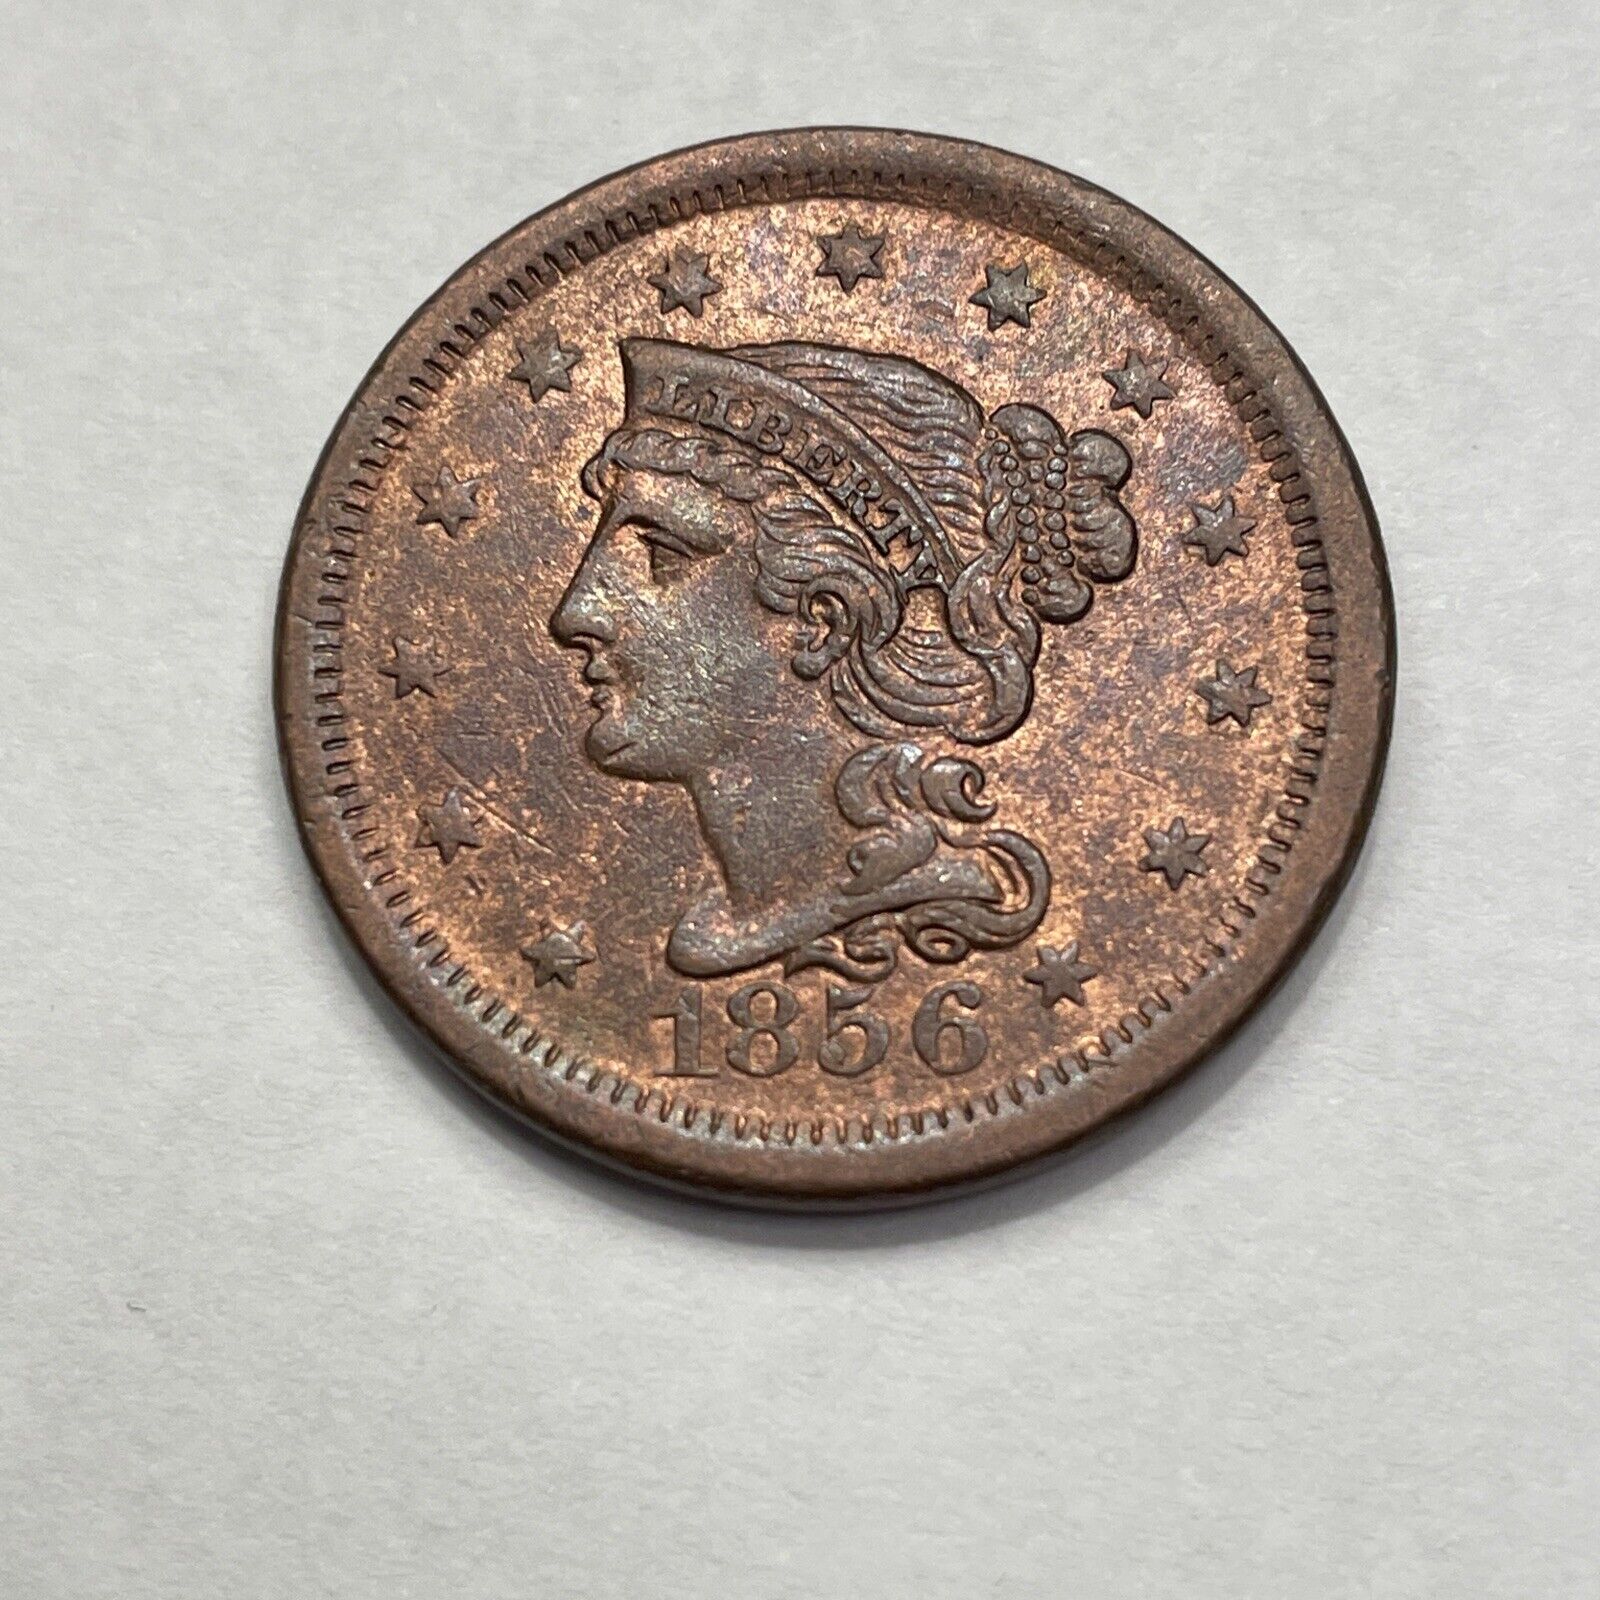 1856 Large Cent RB Almost Unc Gorgeous Braided Hair Upright 5